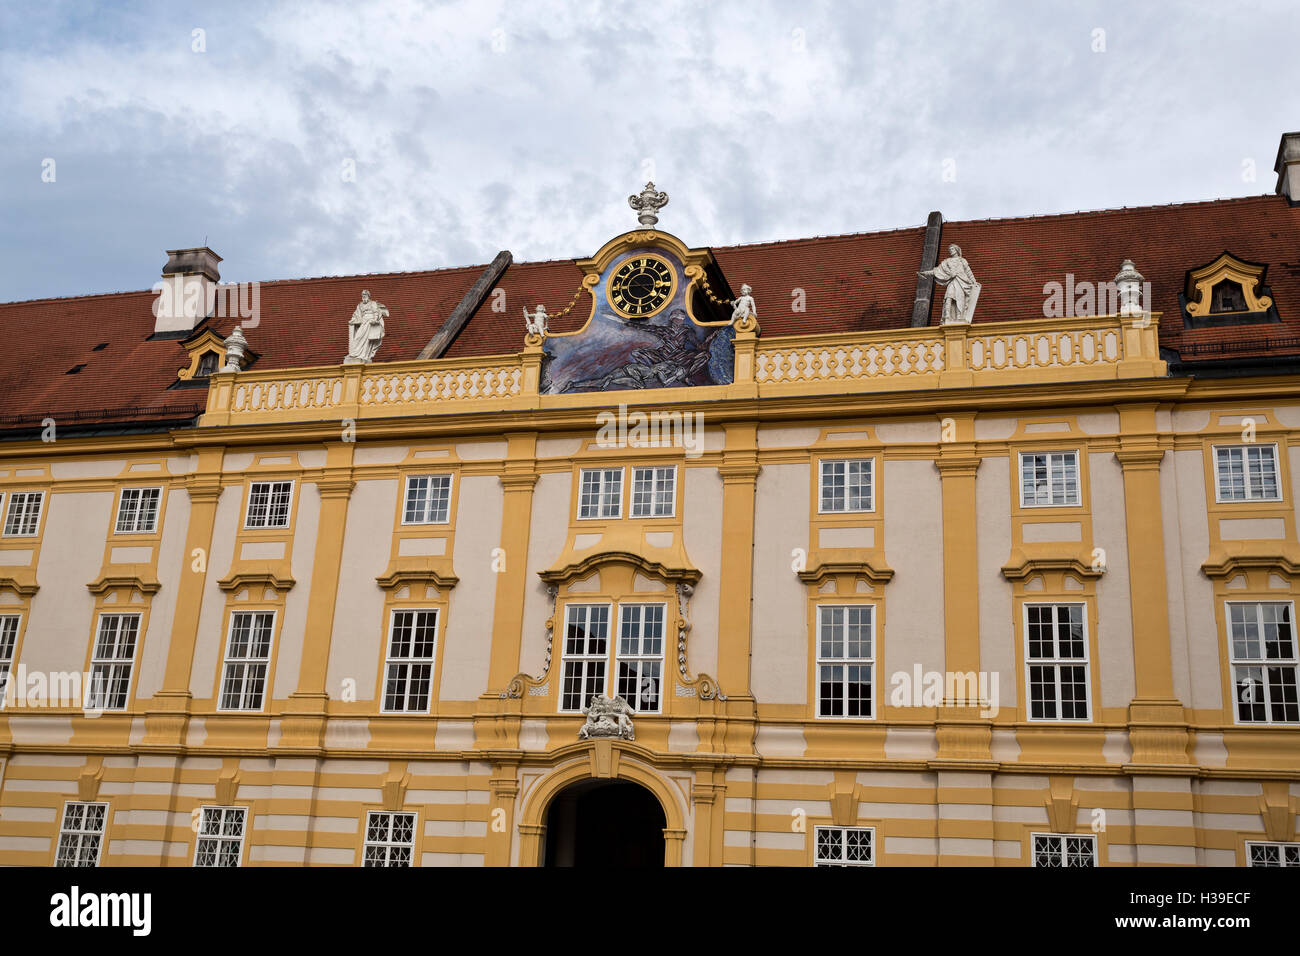 Facade of the convent section of the Benedictine Abbey at Melk, Danube Valley, Austria Stock Photo